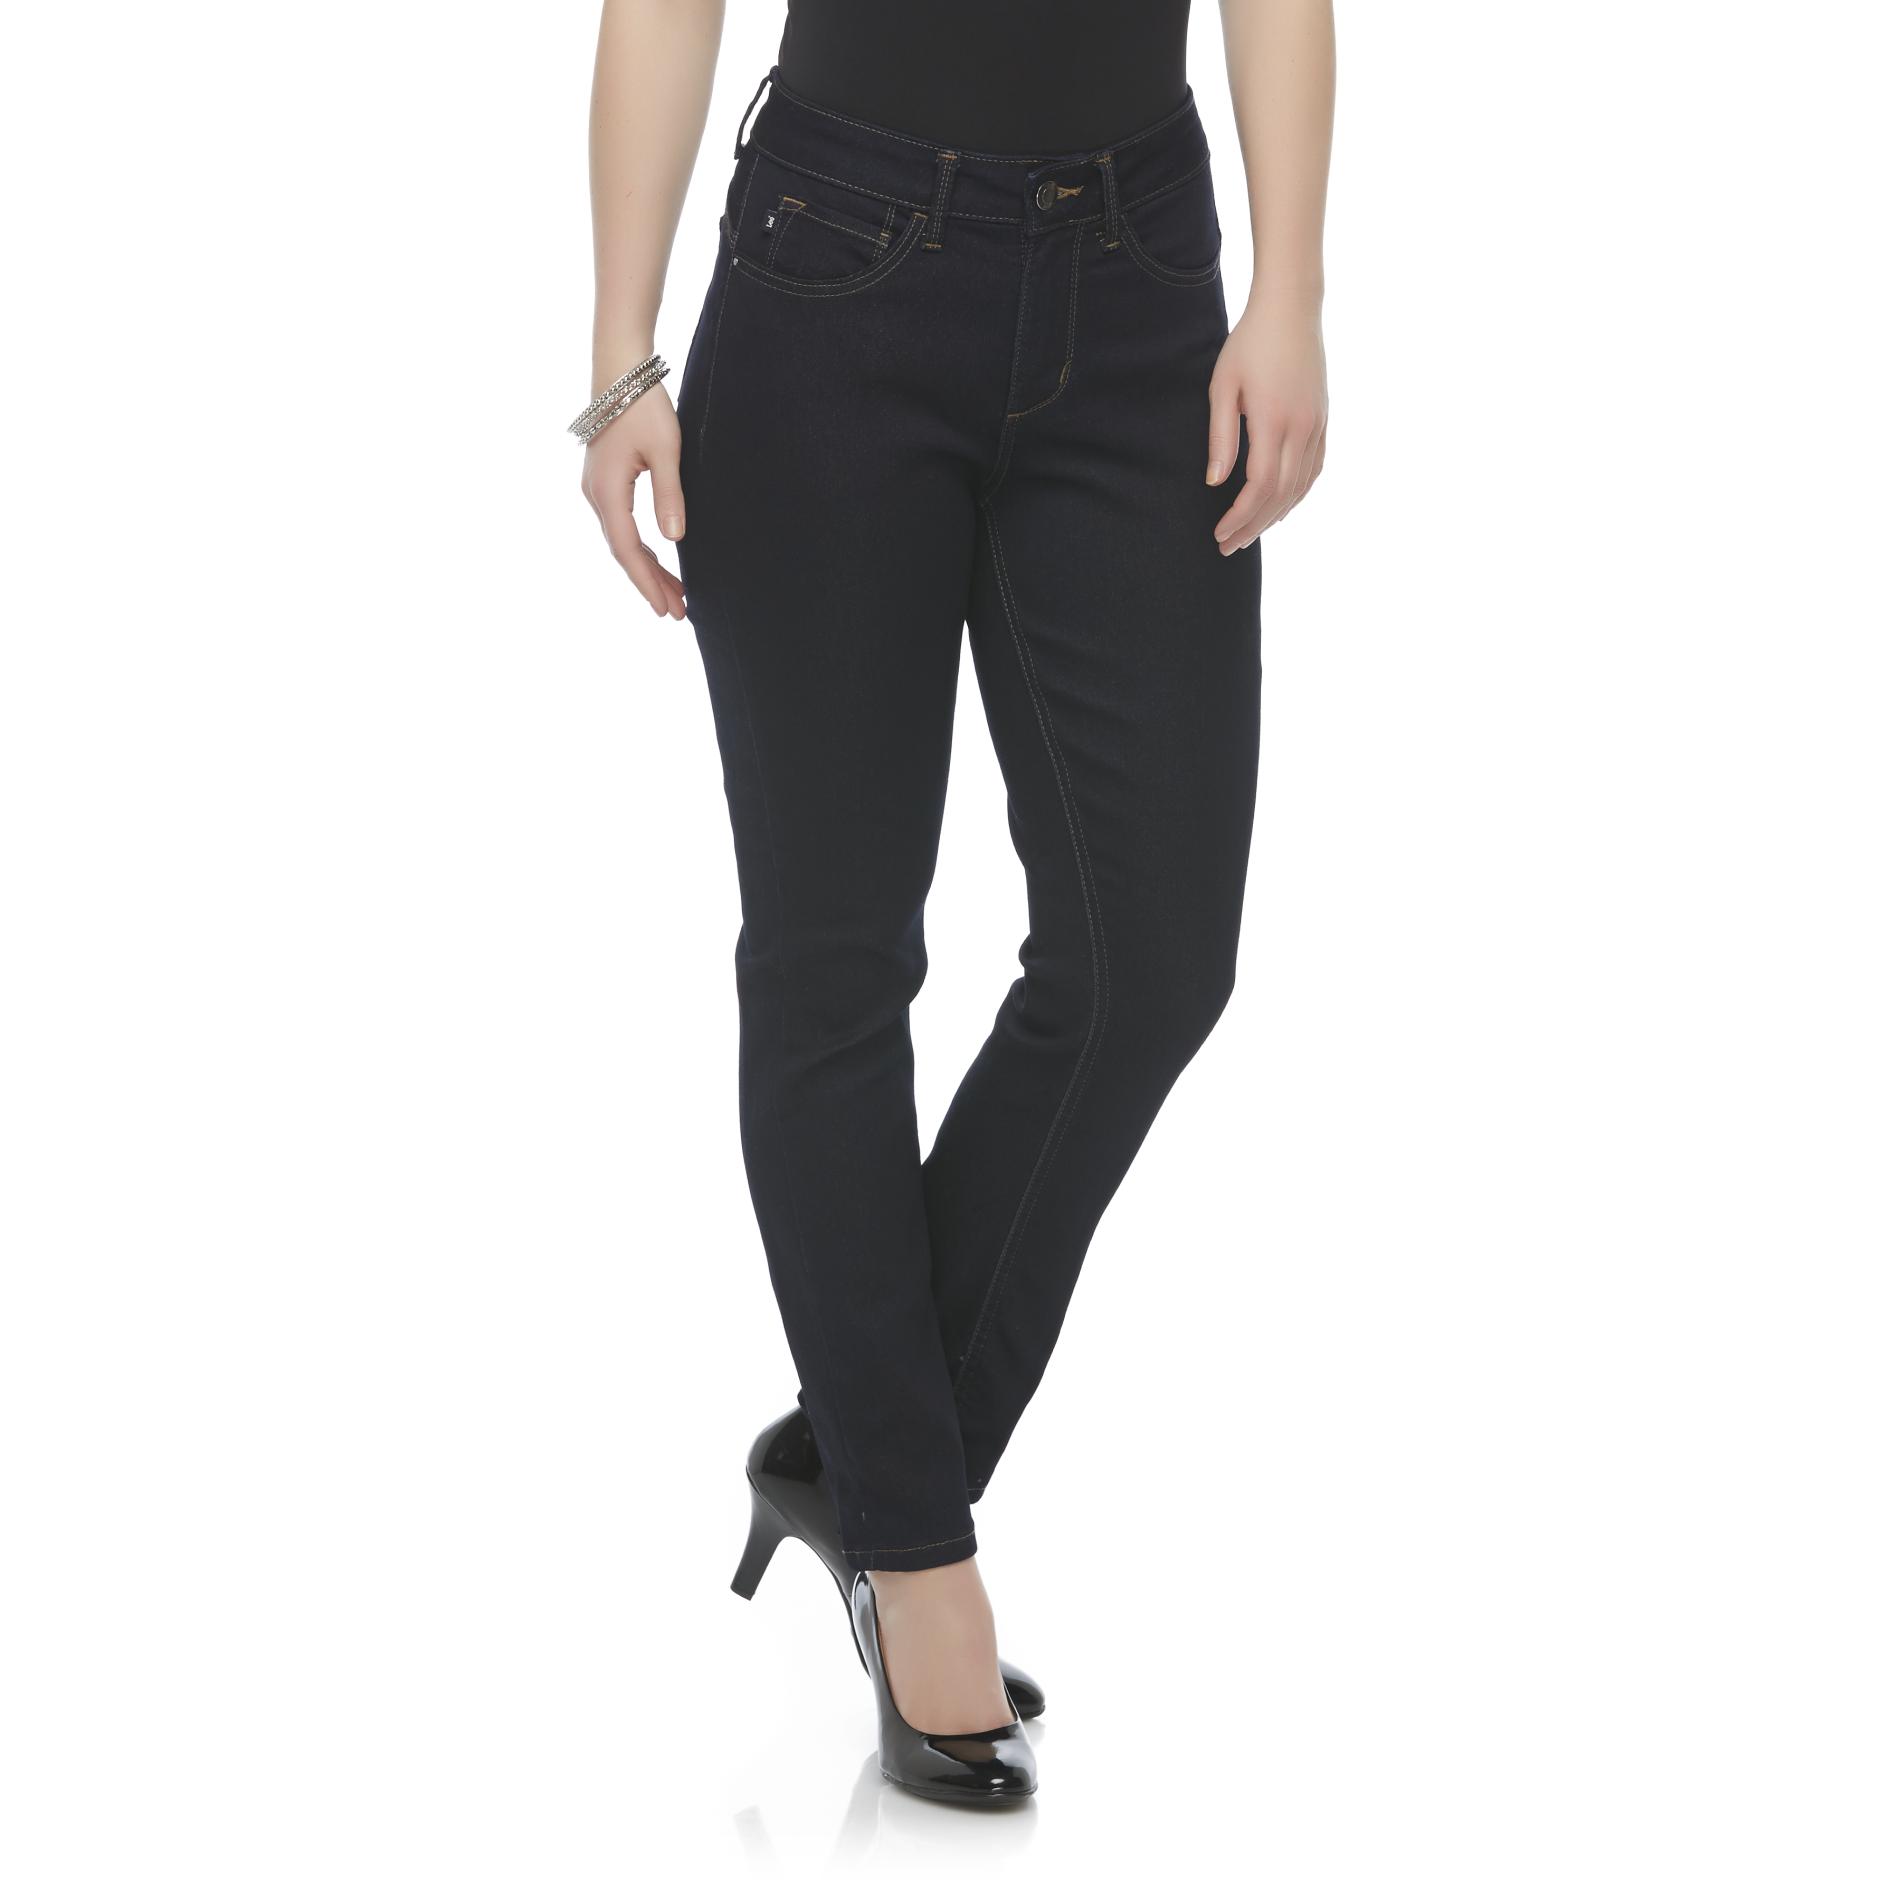 LEE Petite's Easy Fit Frenchie Skinny Jeans